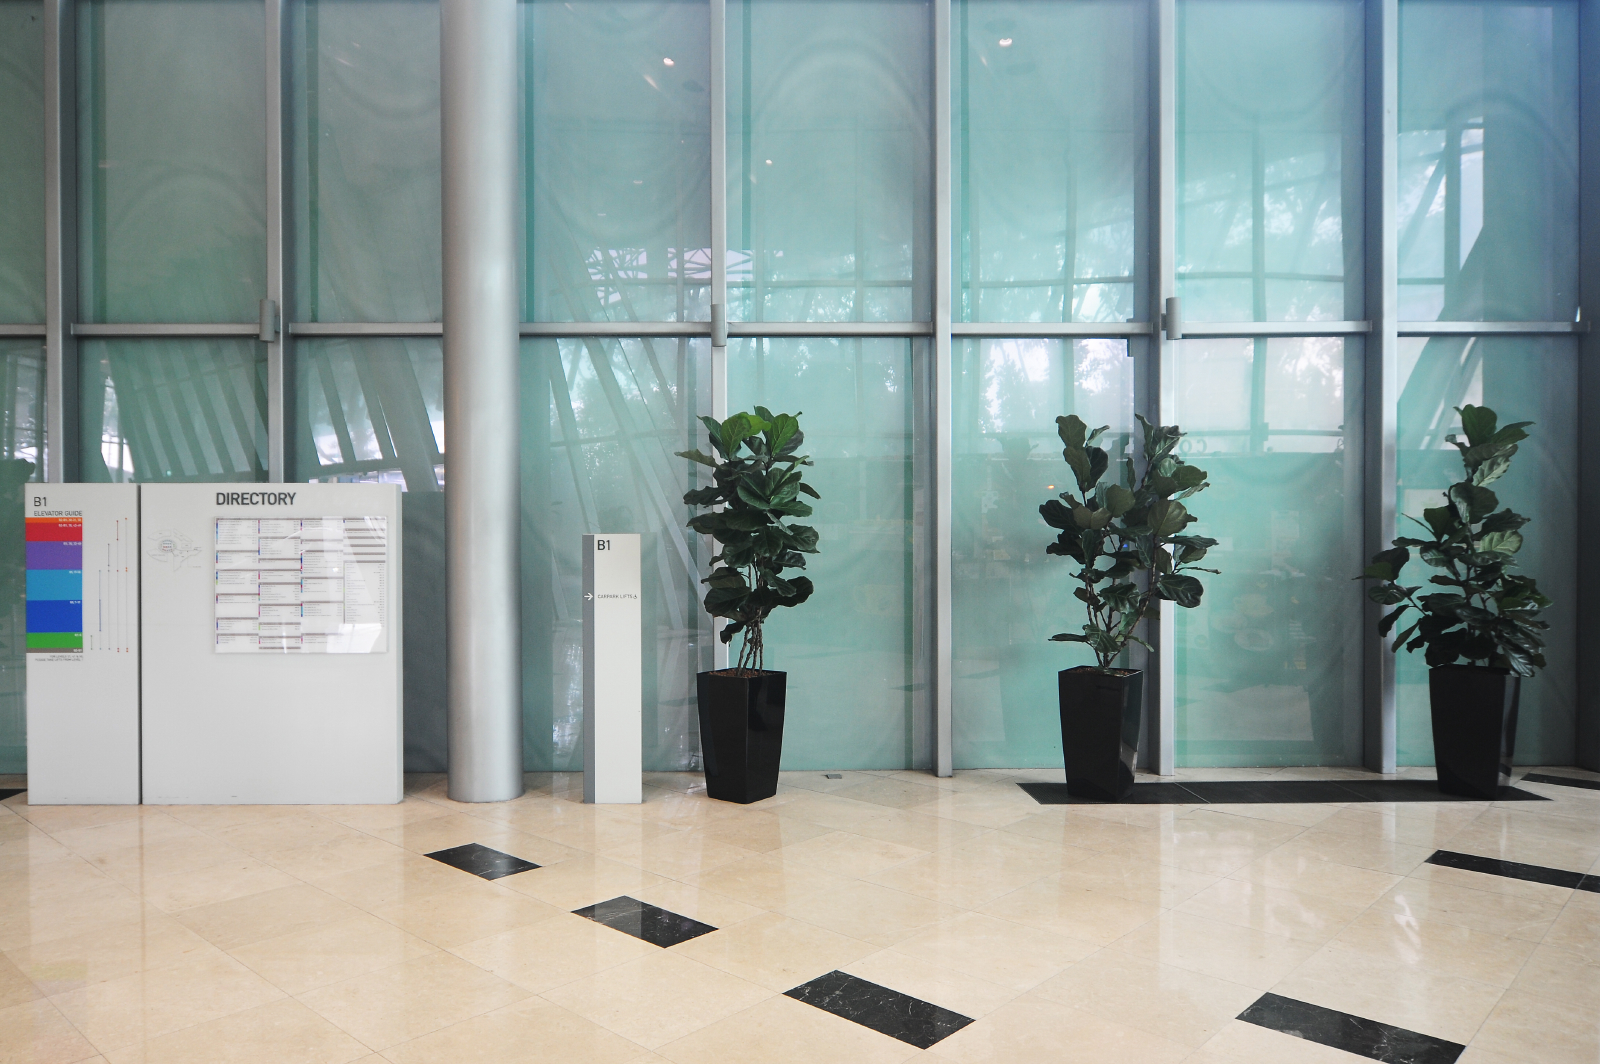 Supply and maintenance of plants at an office in Shenton Way